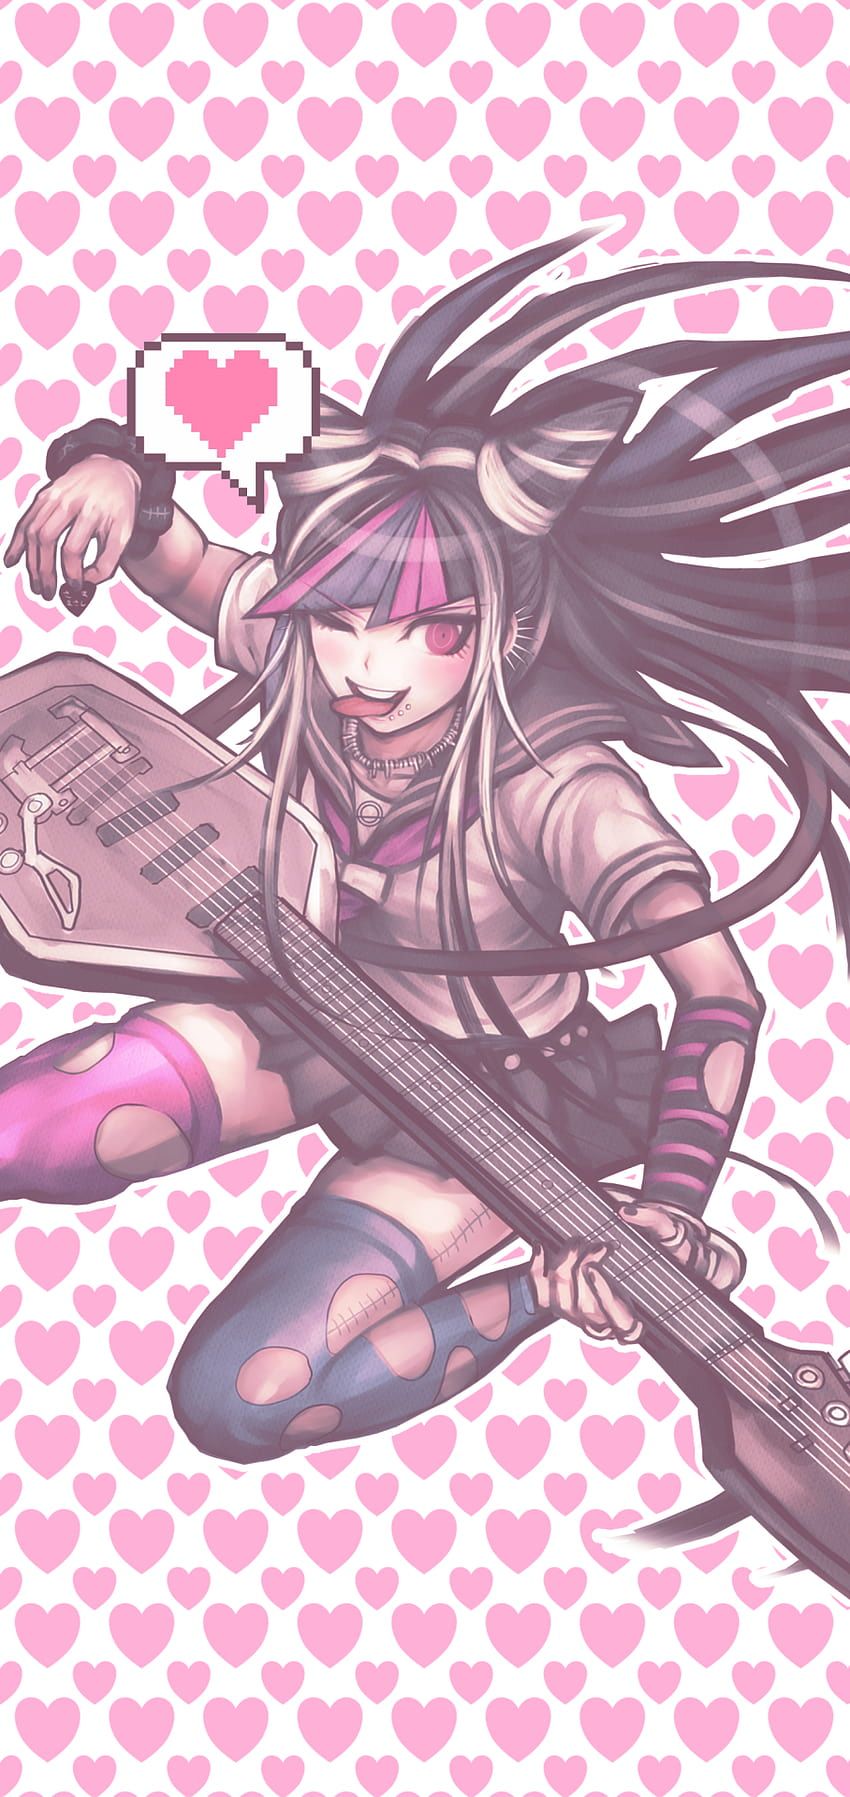 A drawing of a girl with long hair holding a guitar - Lovecore